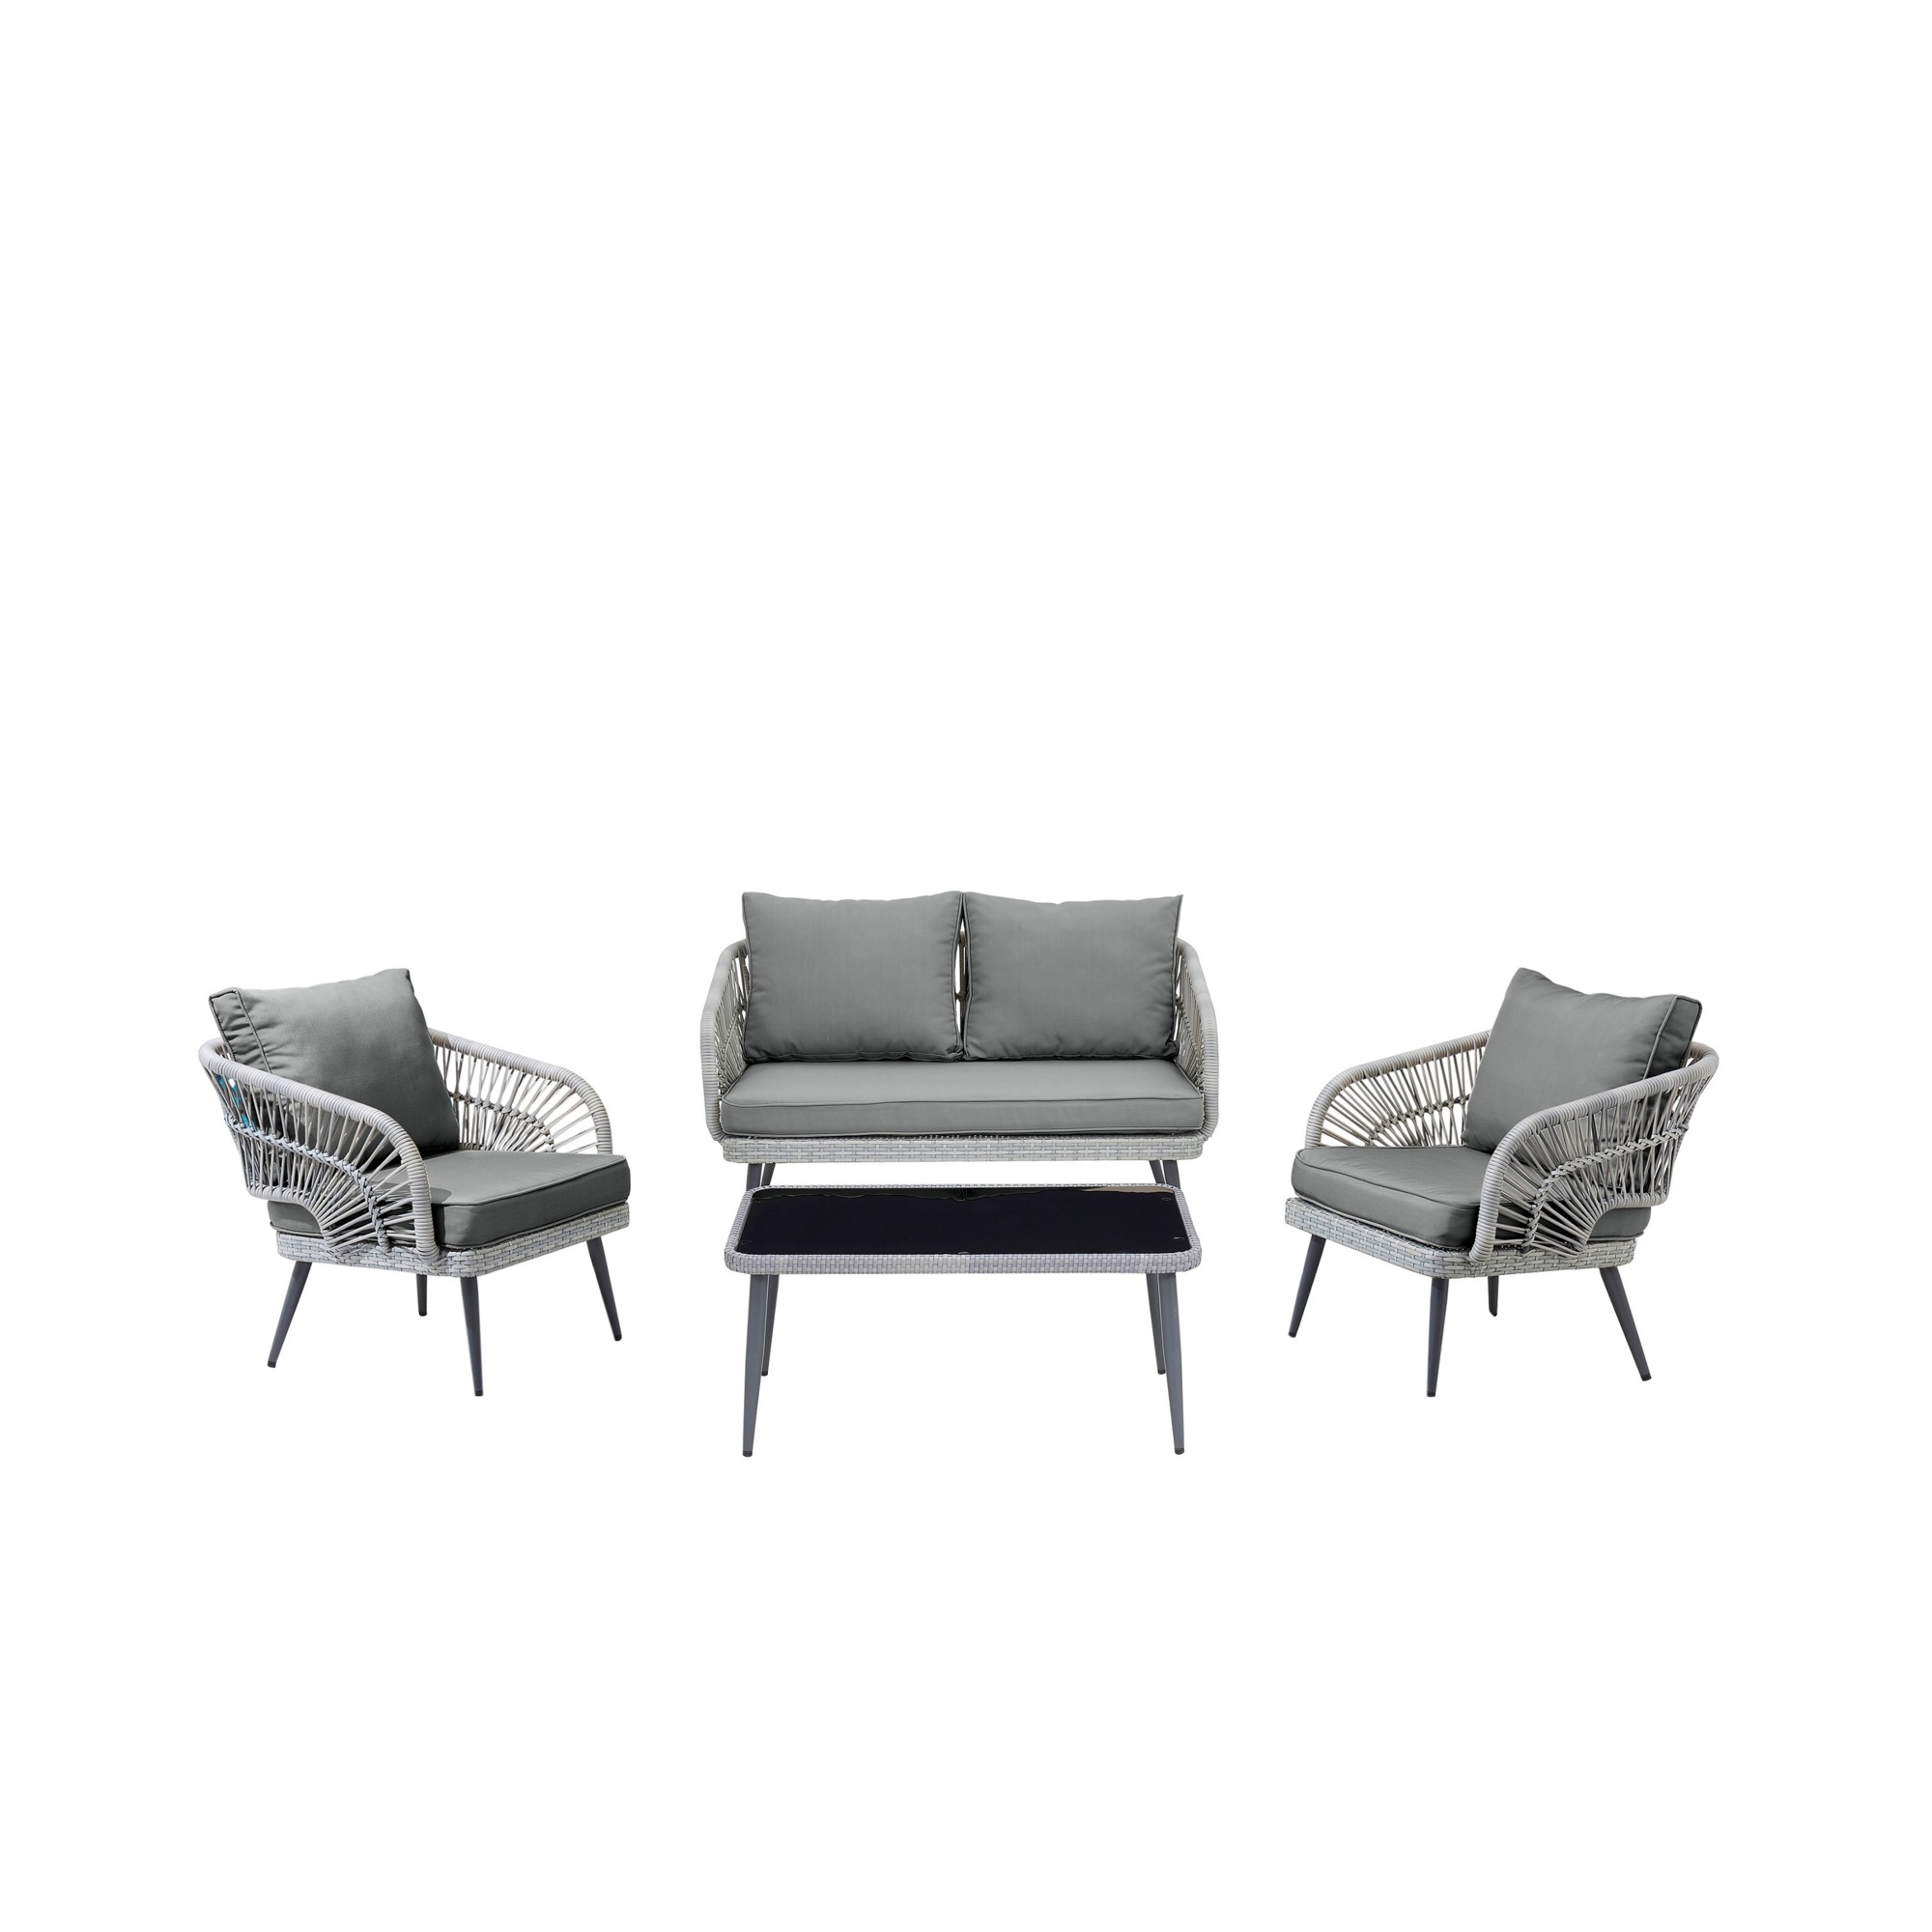 Manhattan Comfort, Riviera Rope 4Pc 4 Seater Patio Conv Set Cream, Pieces (qty.) 4 Primary Color Gray, Seating Capacity 4 Model OD-CV016